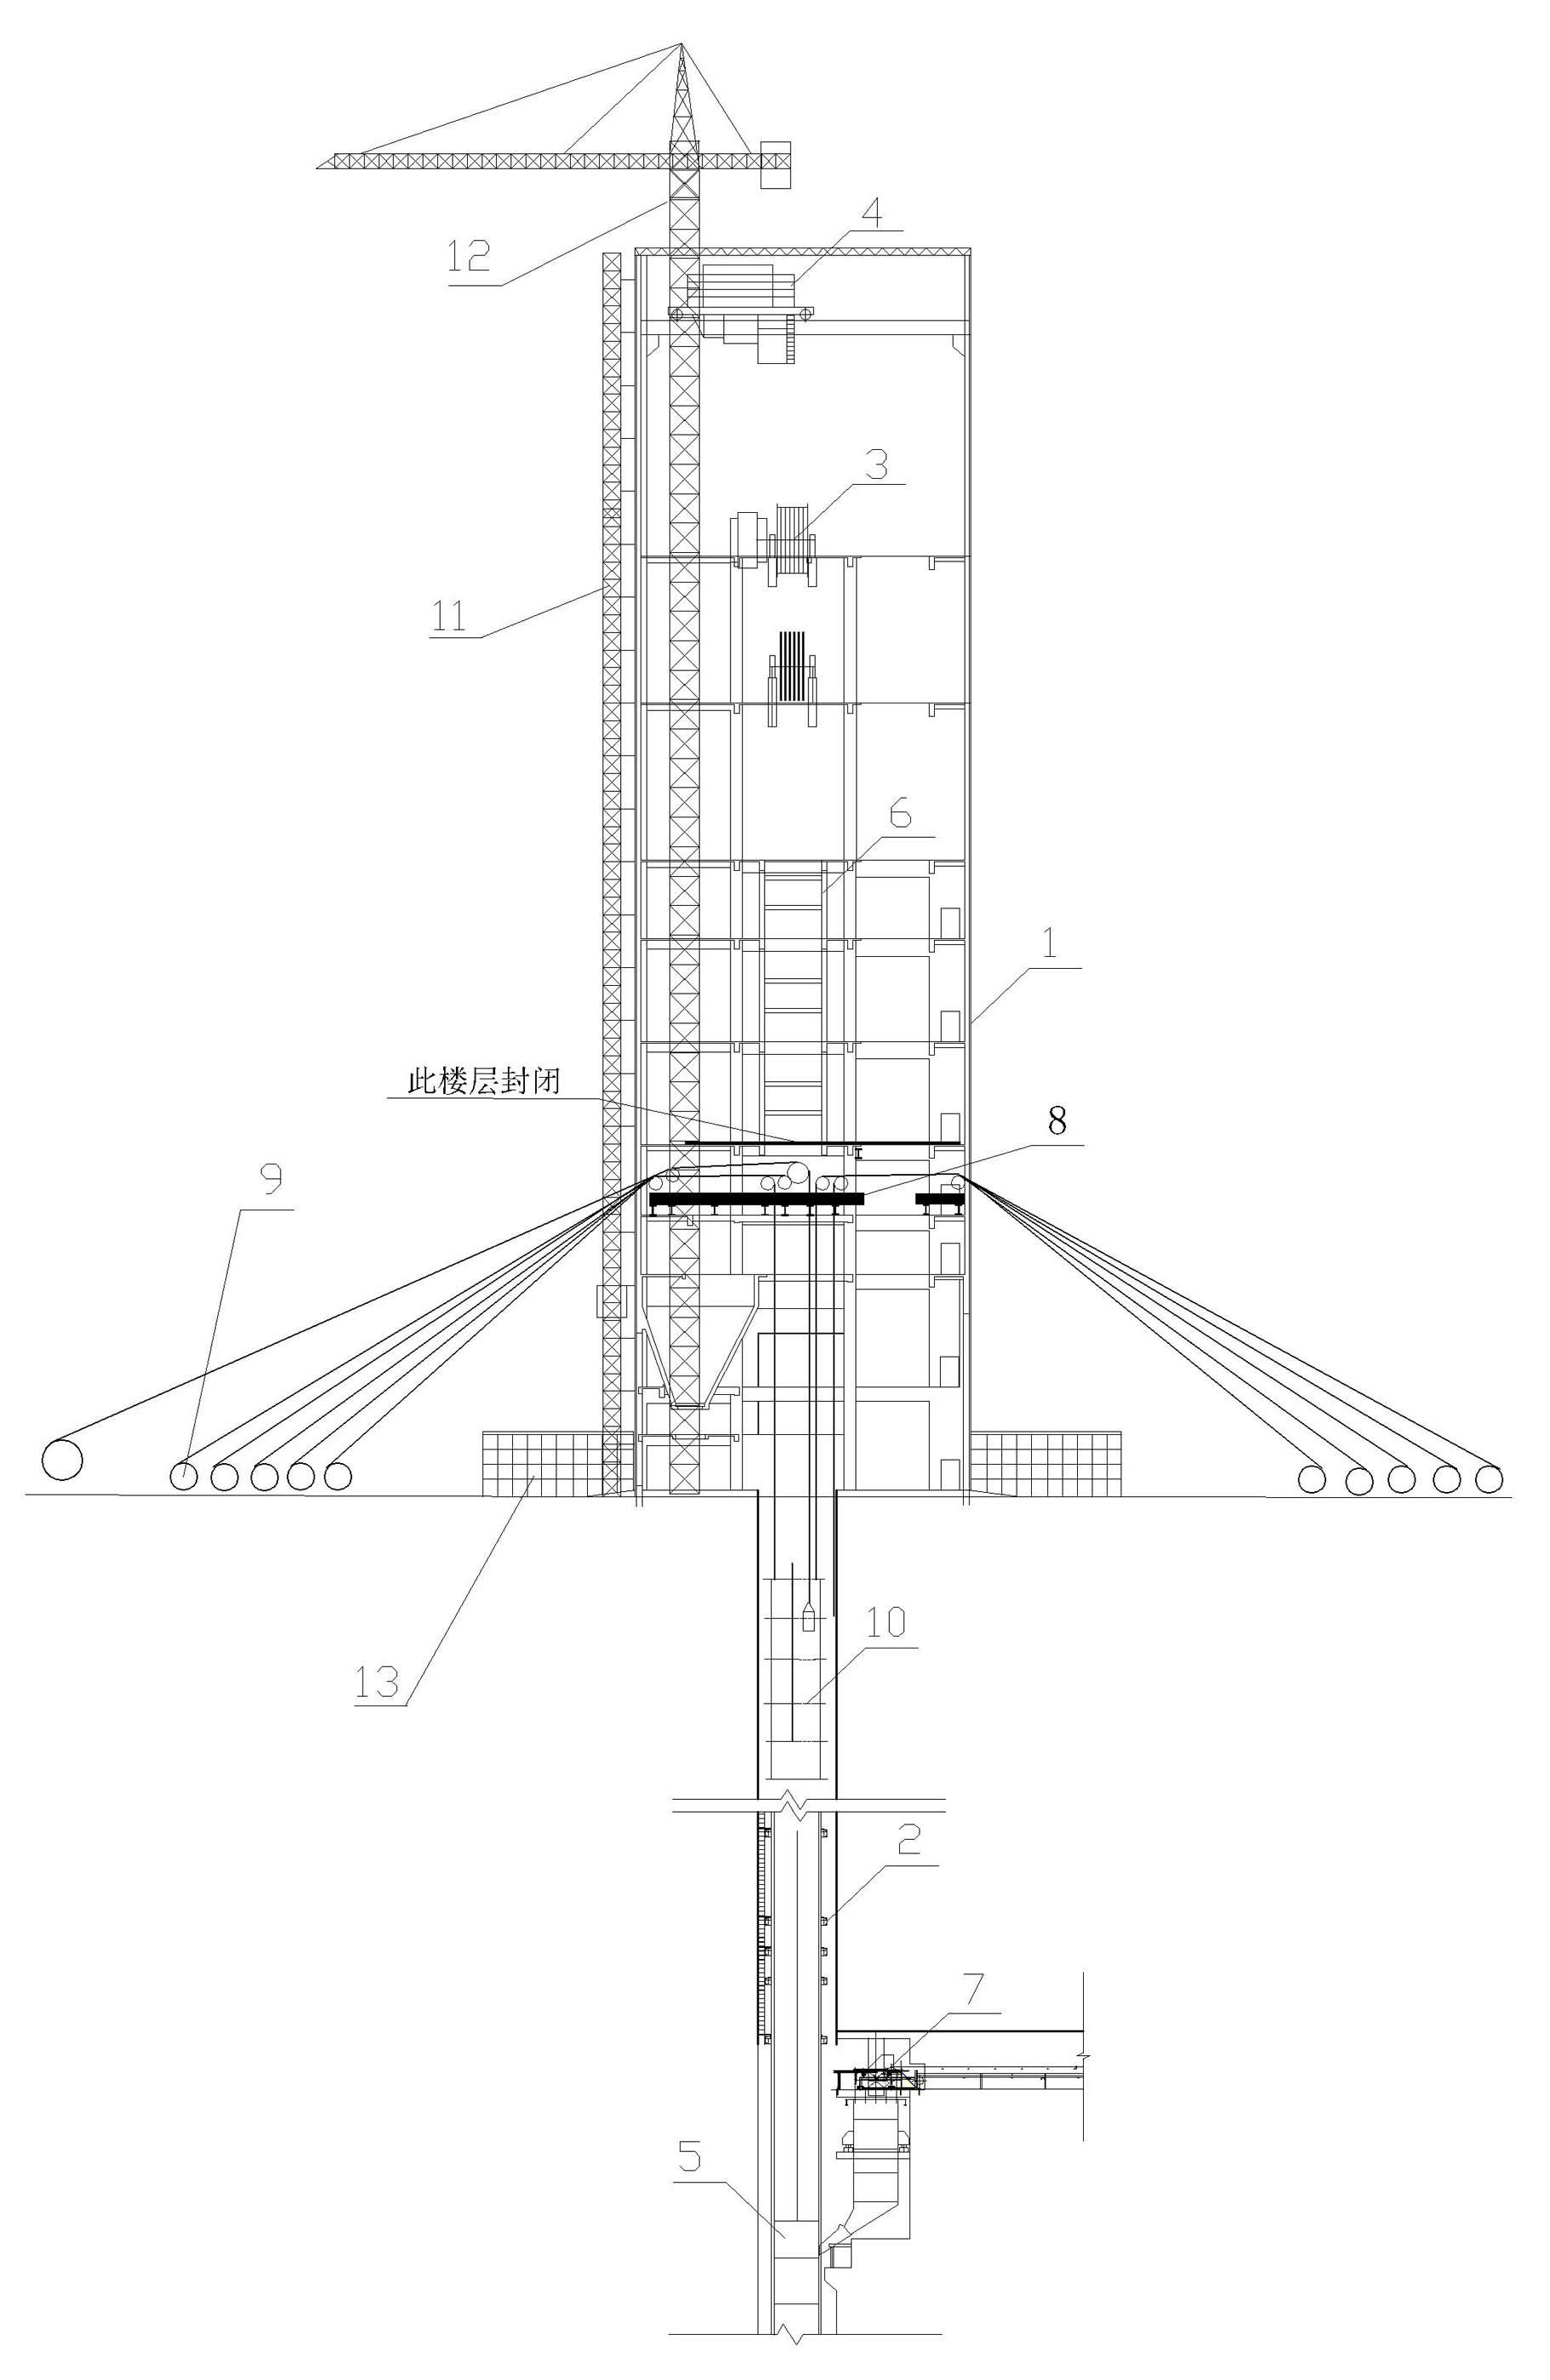 Fast construction method of headframe lifting system